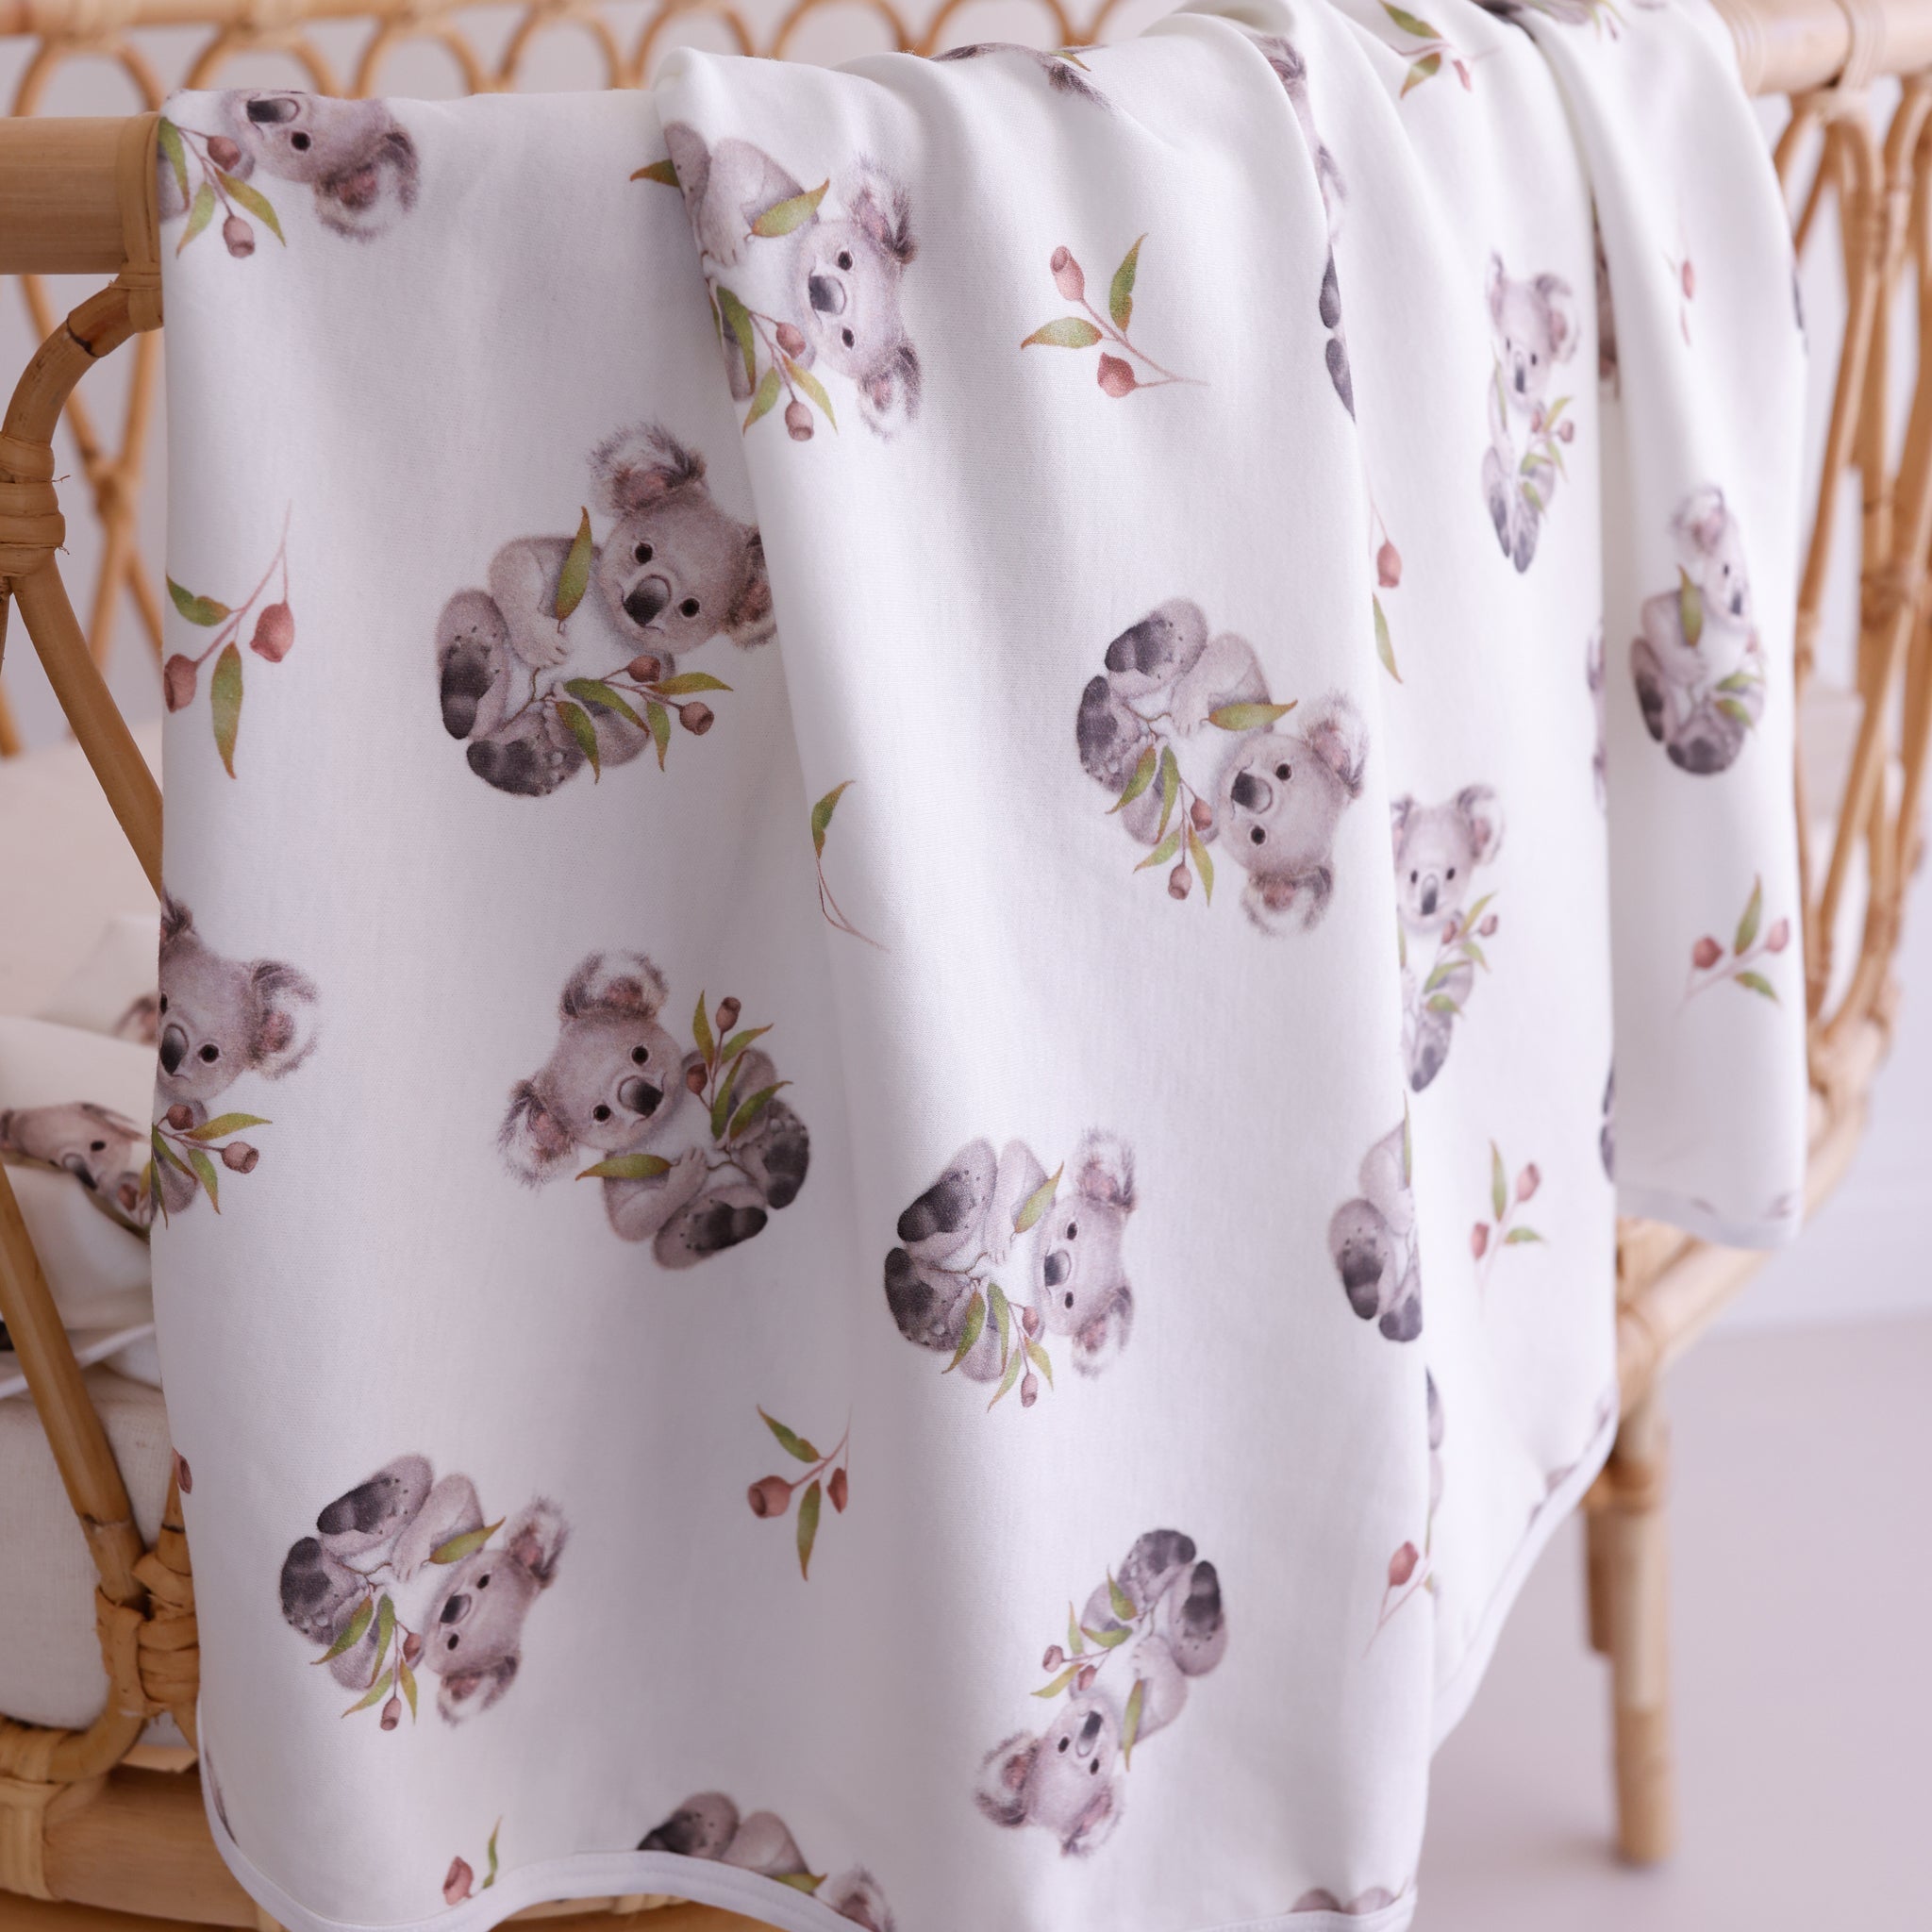 Koala a cuddly icon is perfectly drawn and place as a beautiful pattern onto Gots certified interlock cotton wrap just for your bubs. size 120 x 120cm. no synthetic blends for your bub